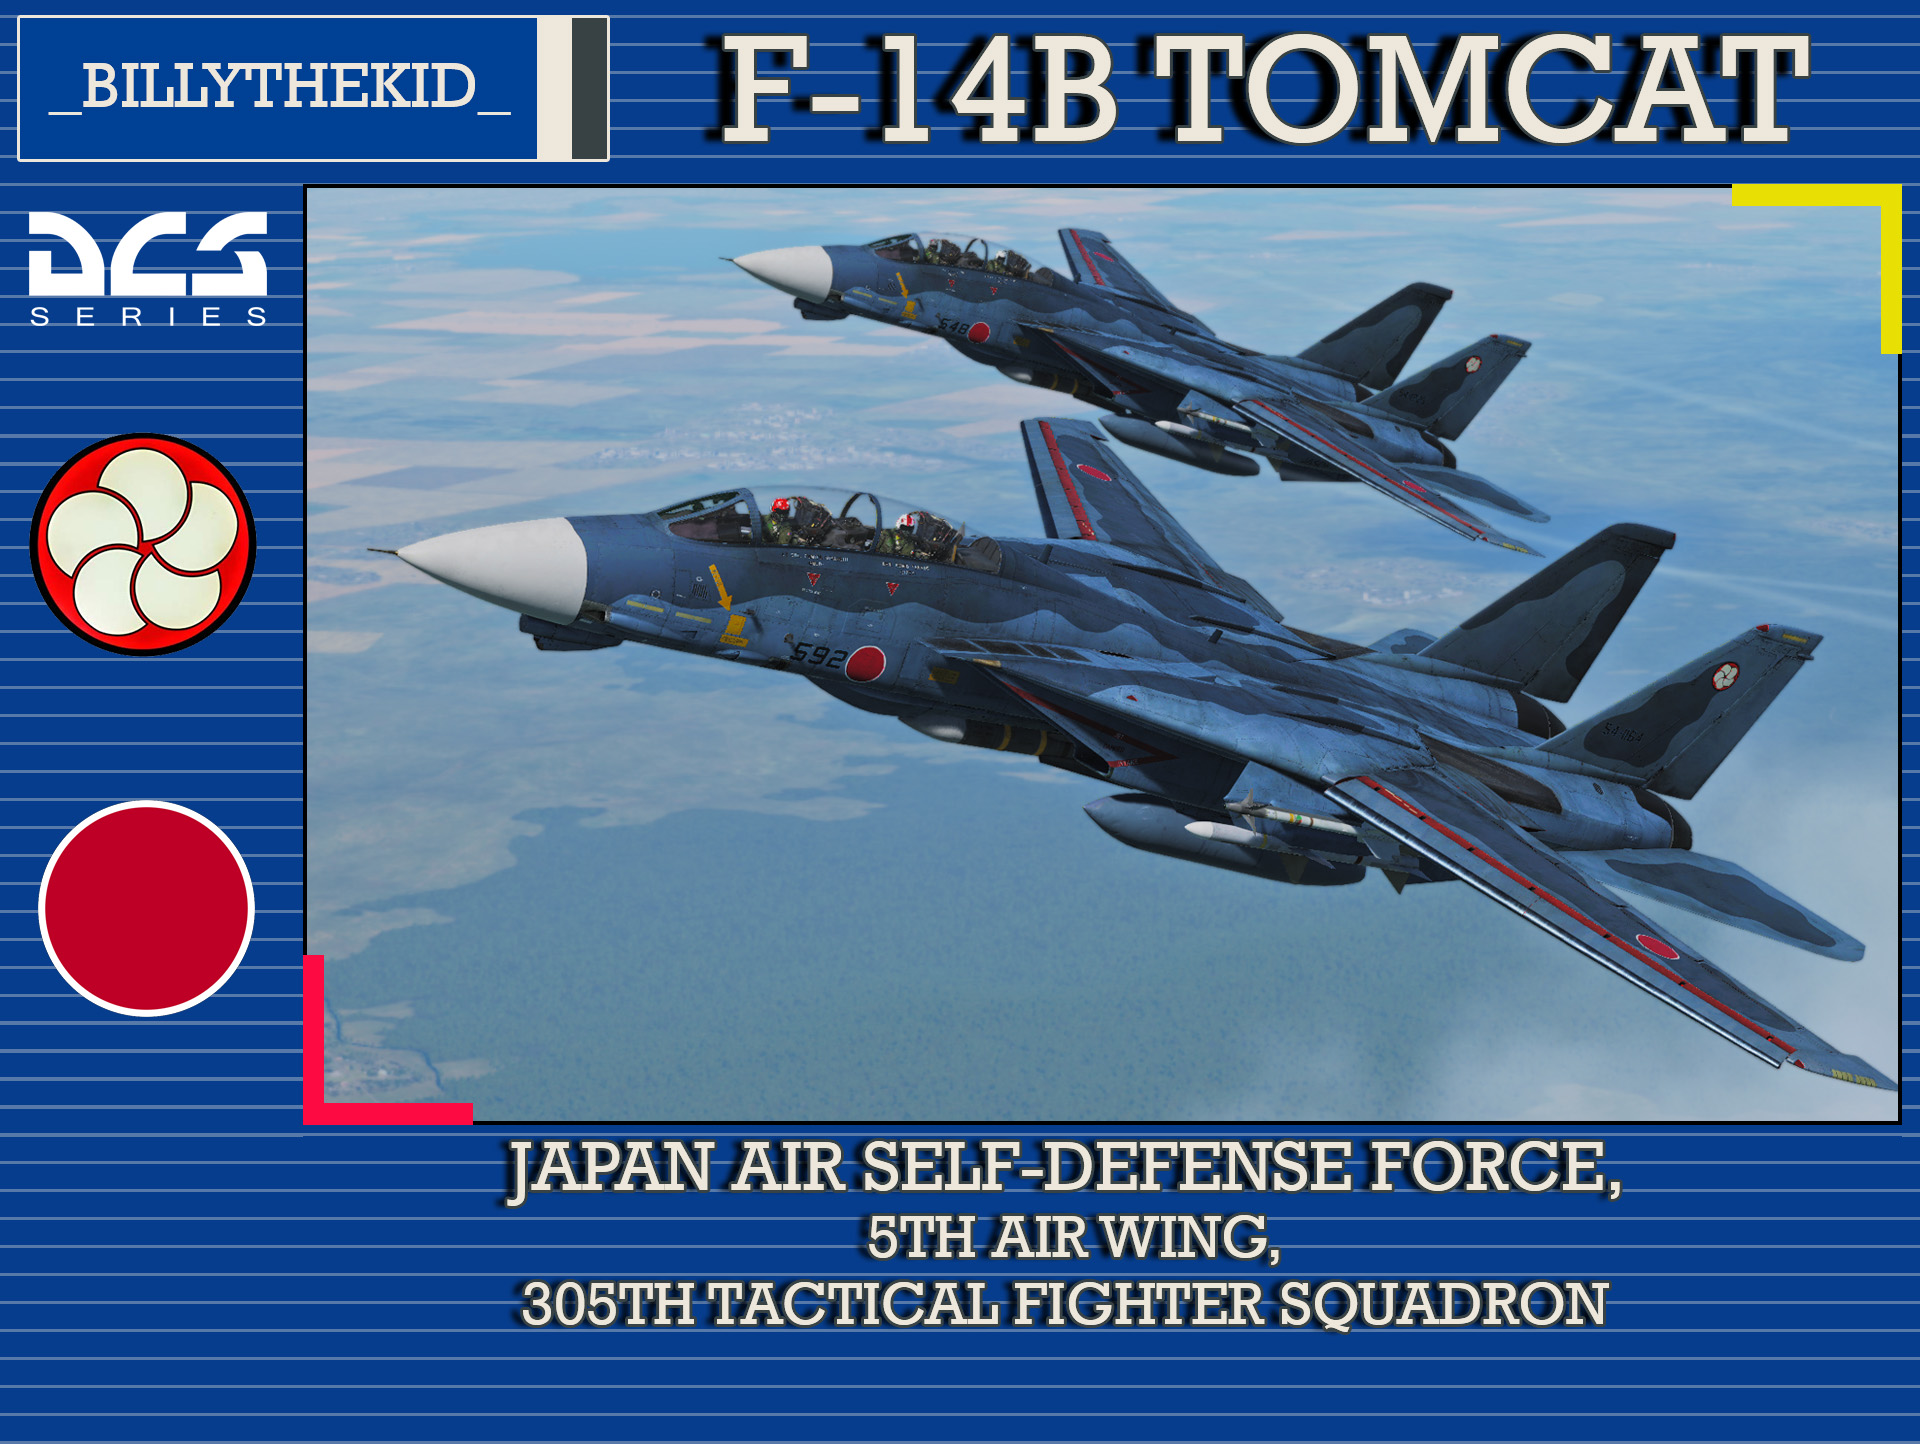 Fictional JASDF 5th Air Wing, 305th Tactical Fighter Squadron F-14J Tomcat